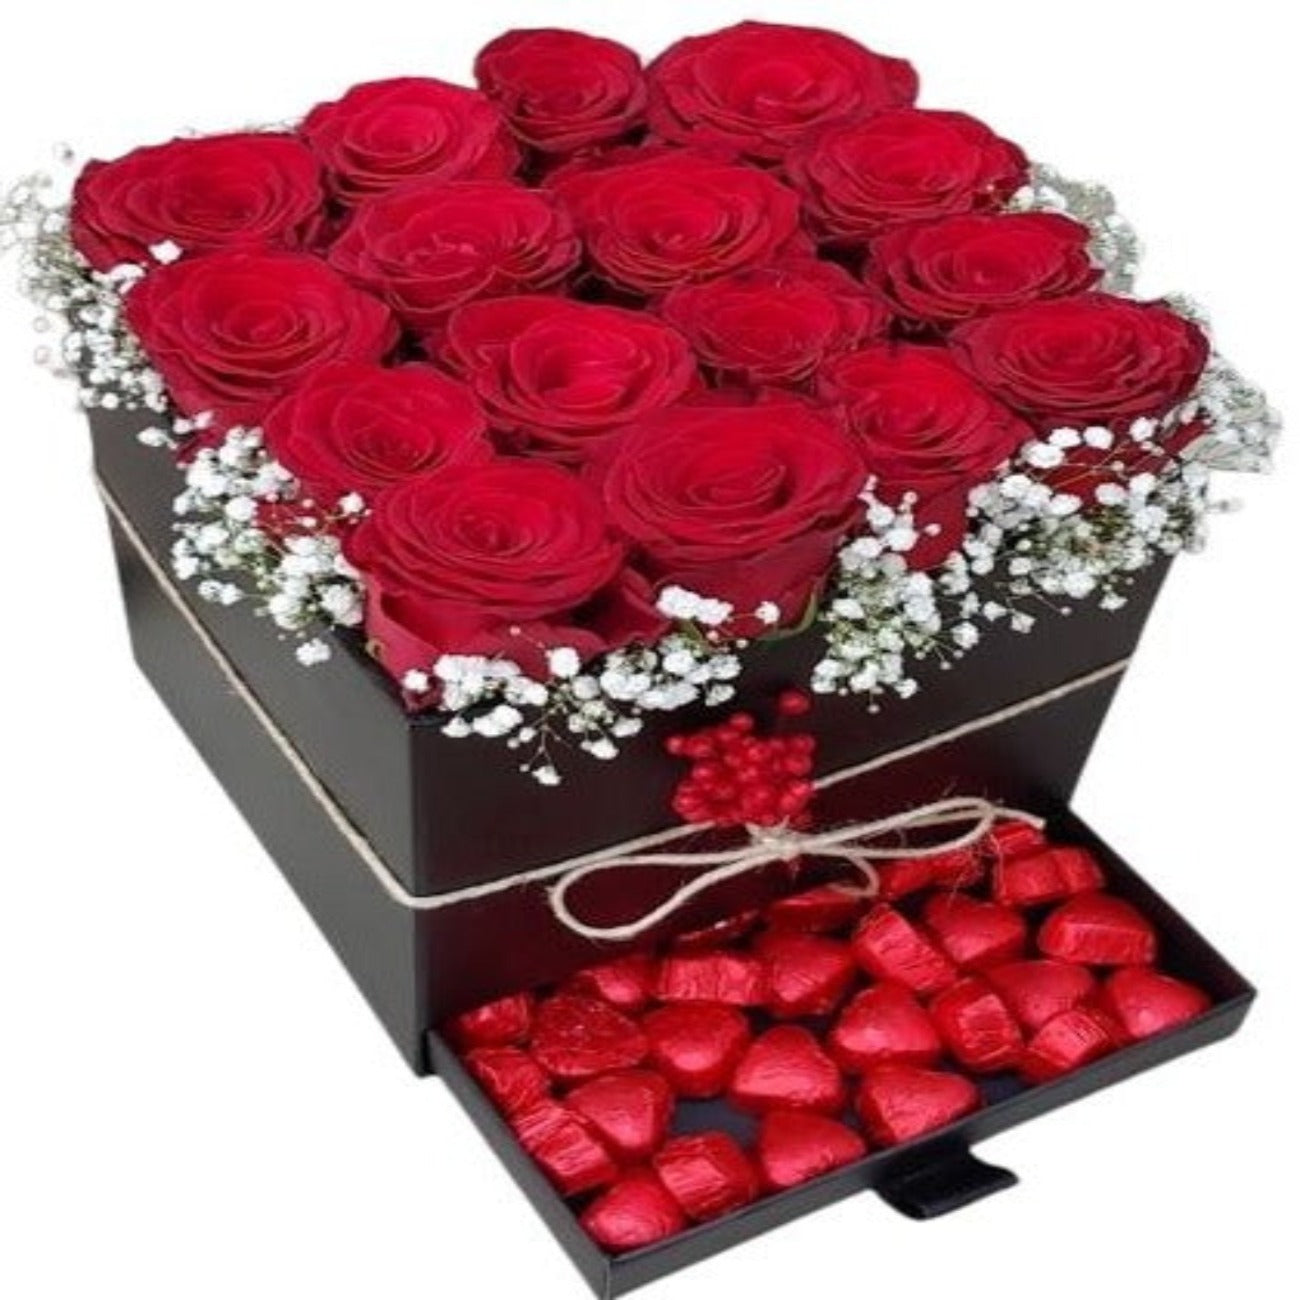 Red Roses with Gypsophila and Chocolate Secret Box